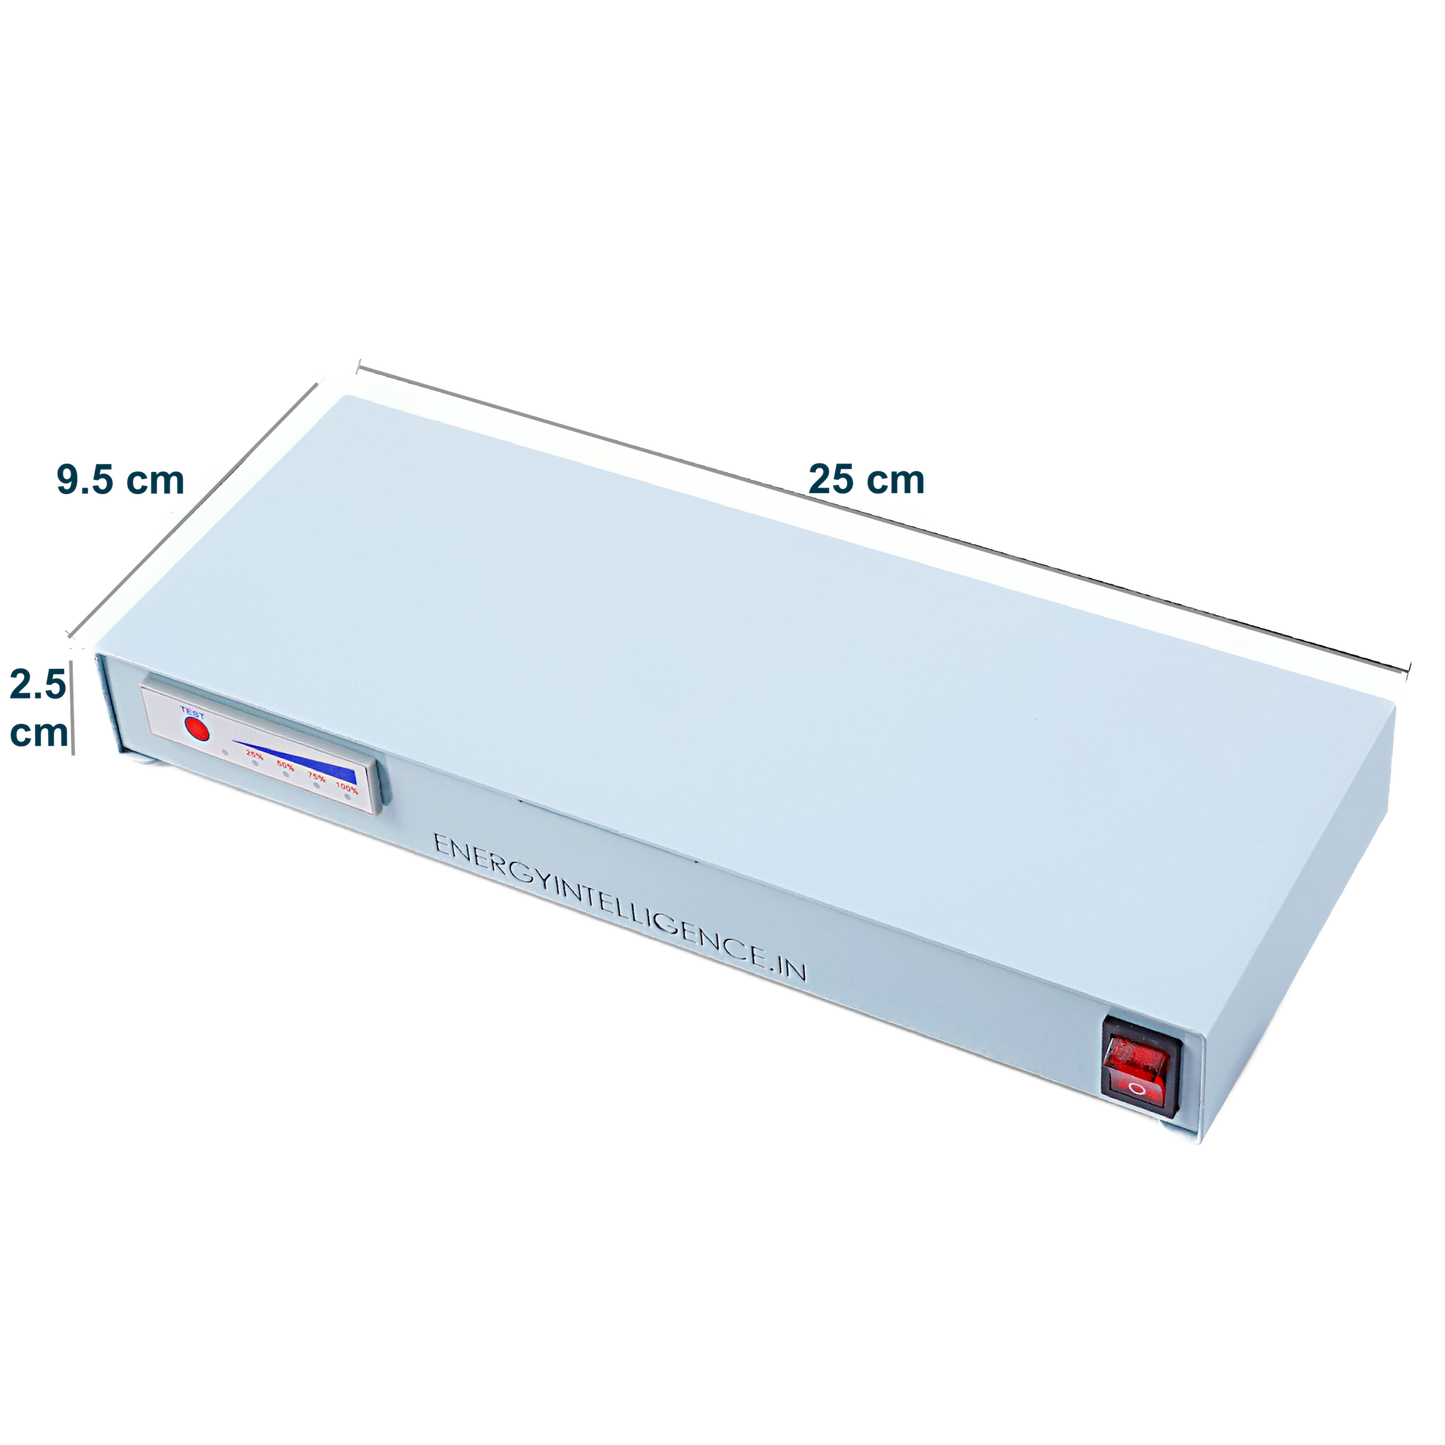 Li-Ion Power Bank for Barrel/Square Laptops (65W) - Includes 12 laptop pins